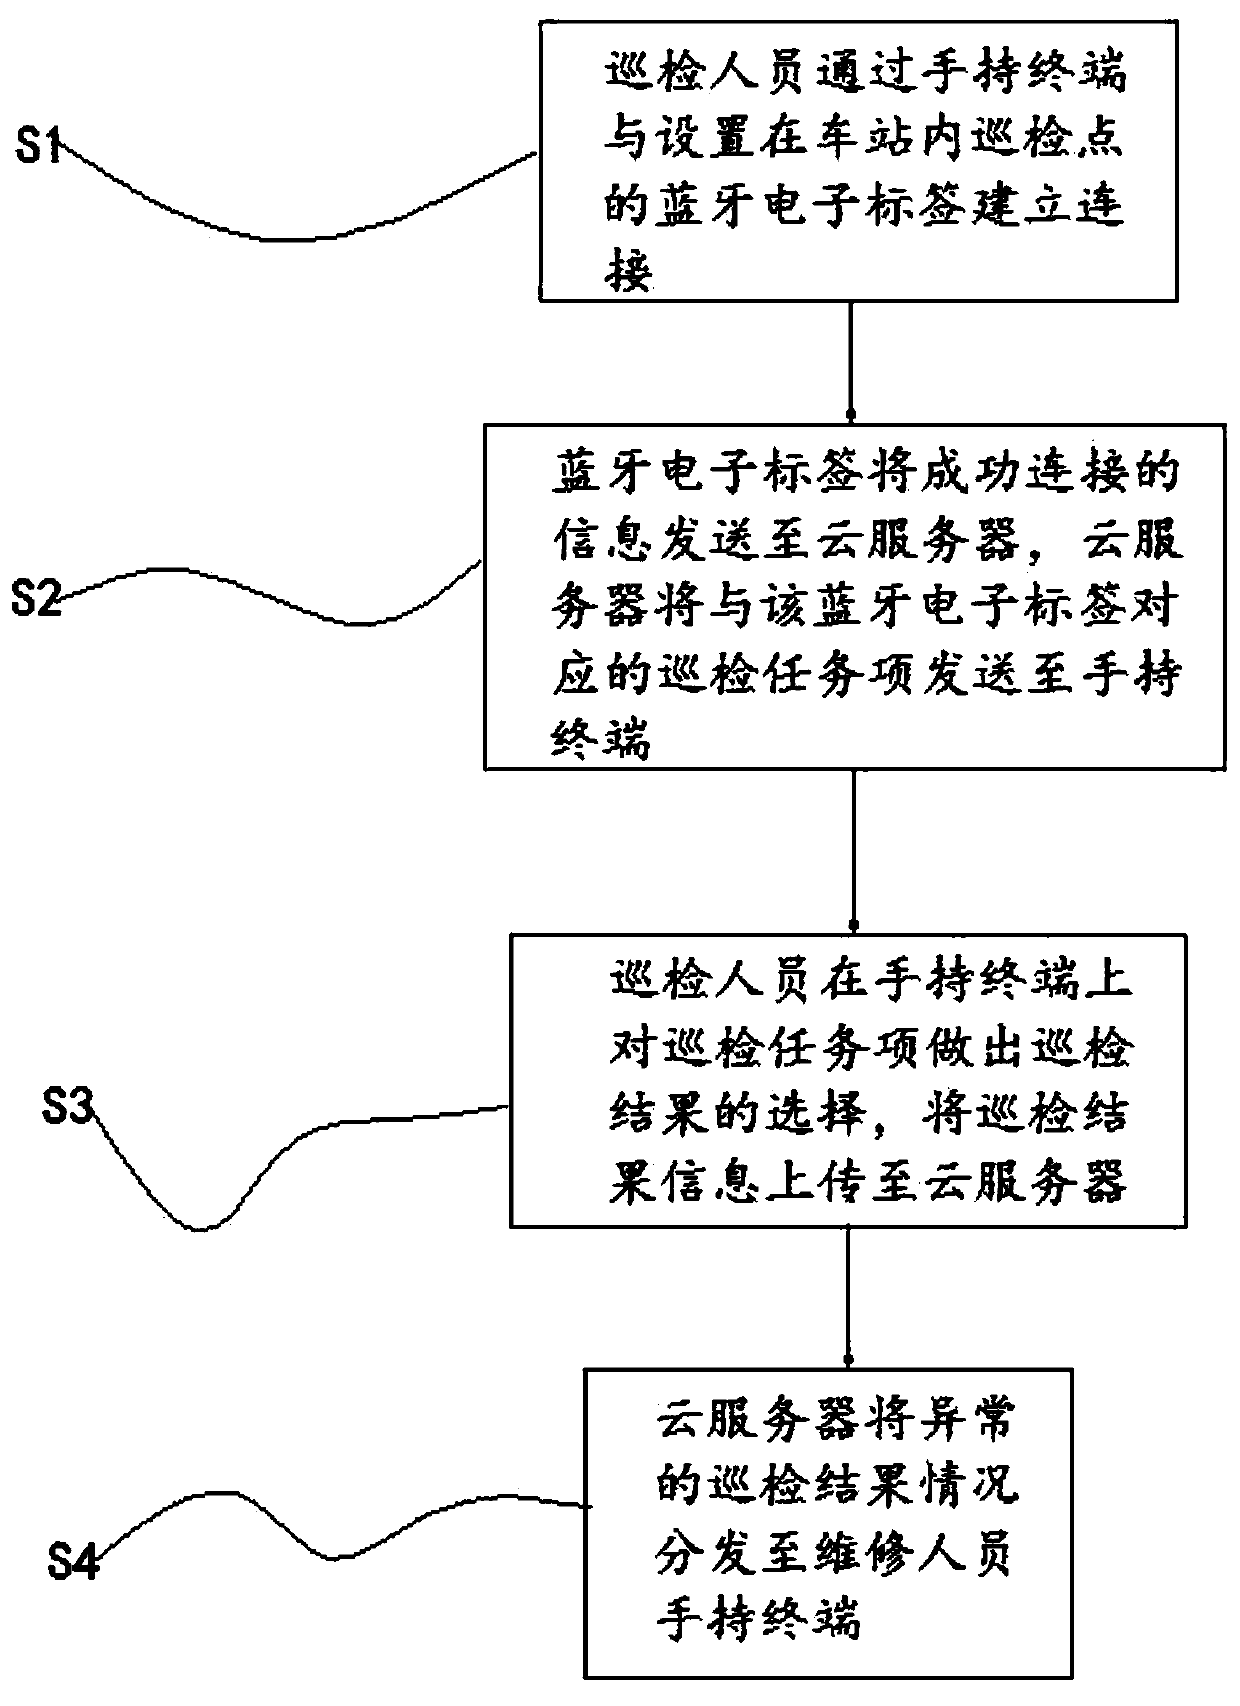 A station inspection method and inspection system thereof